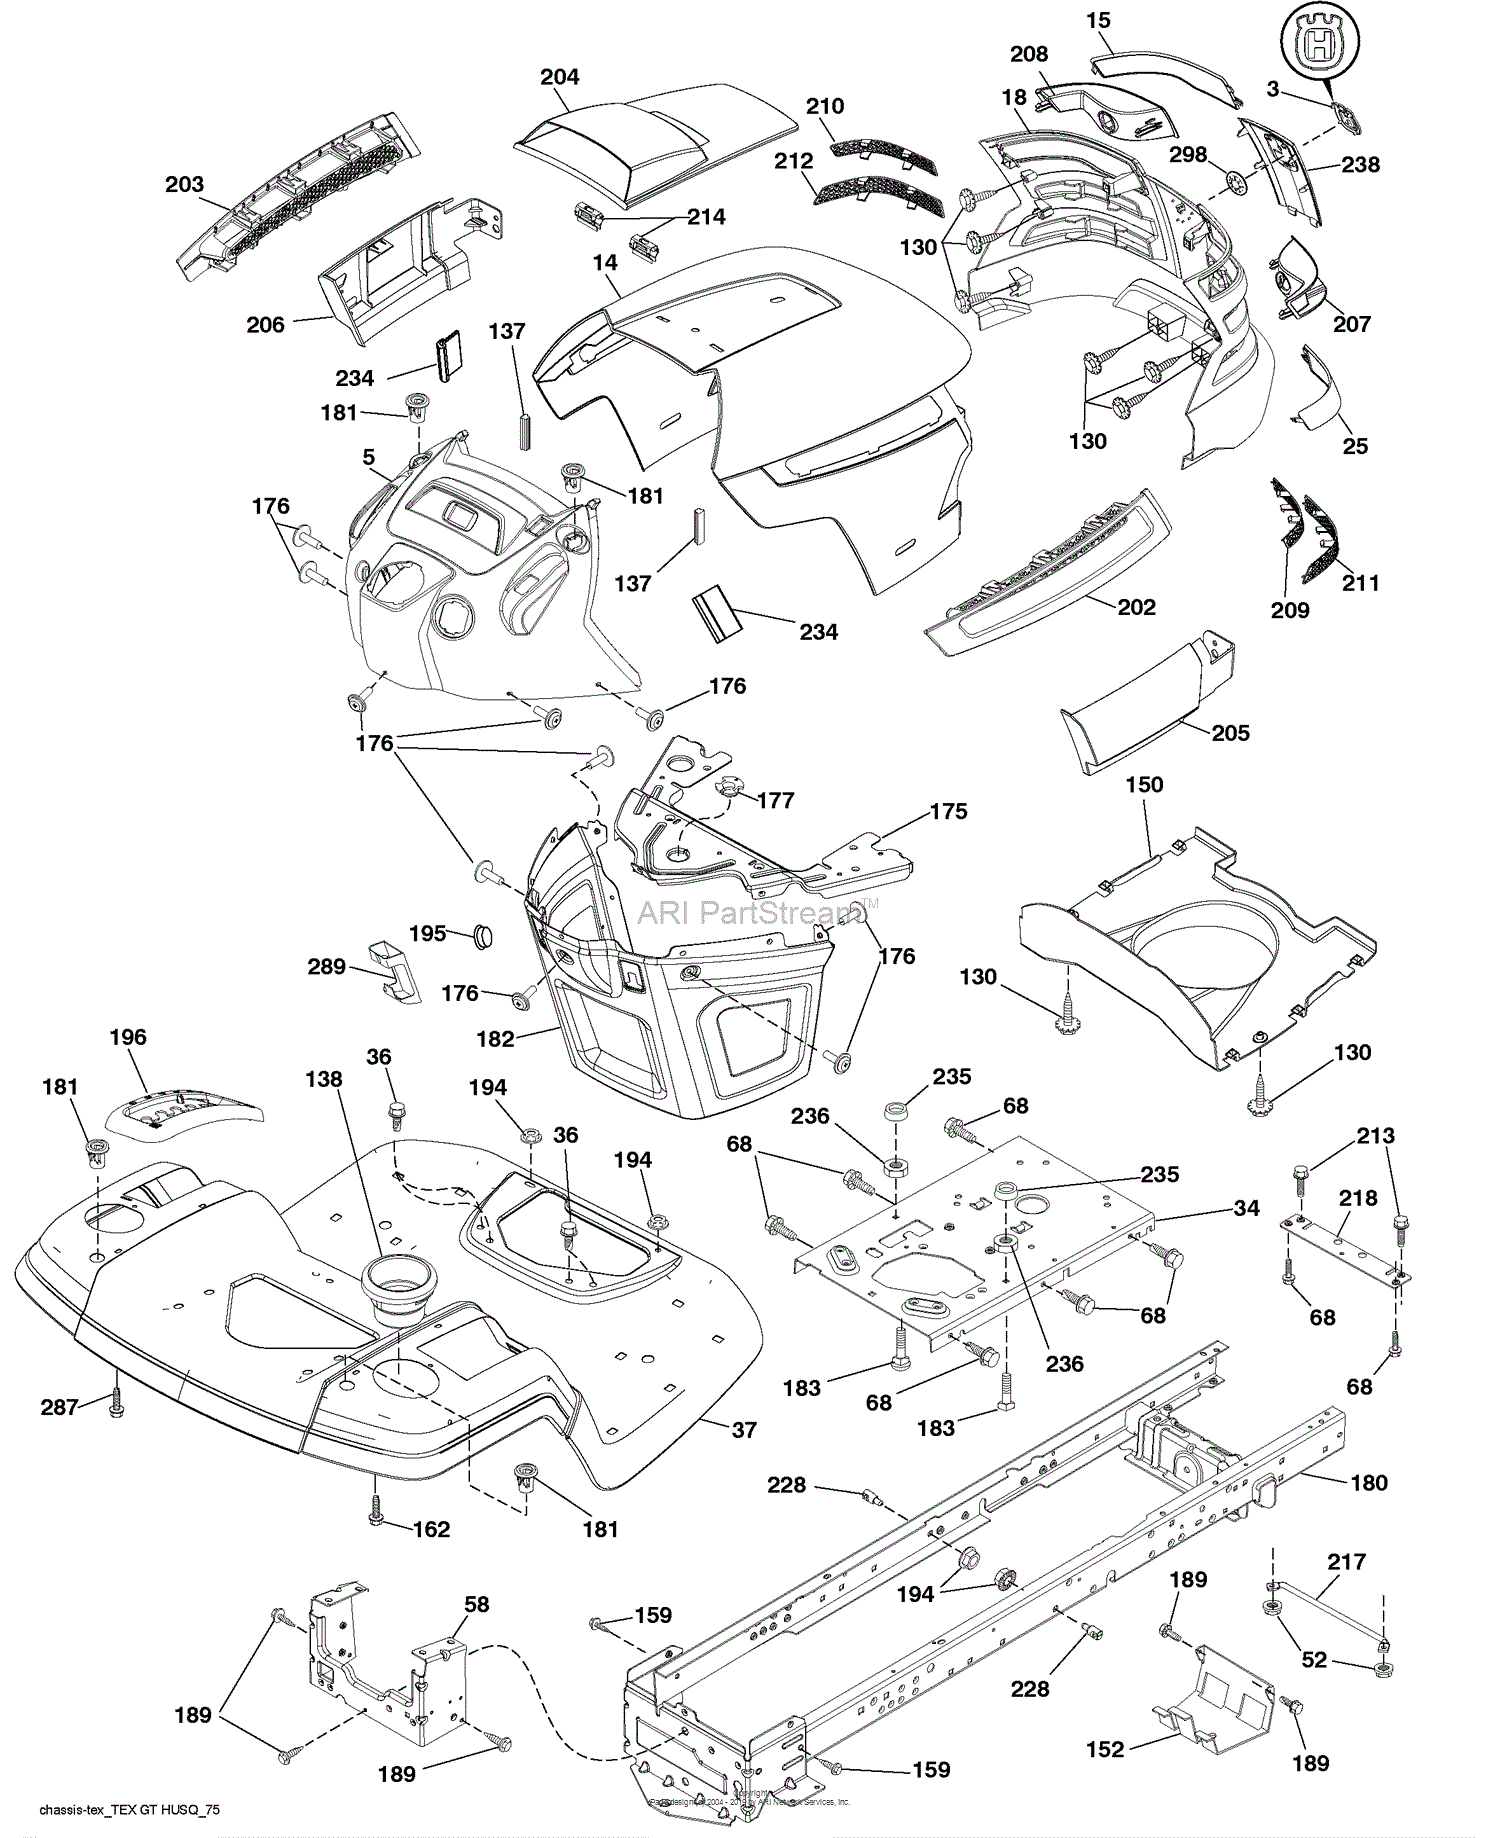 Husqvarna YTH 2042 (96043009200) (2010-02) Parts Diagram for Chassis